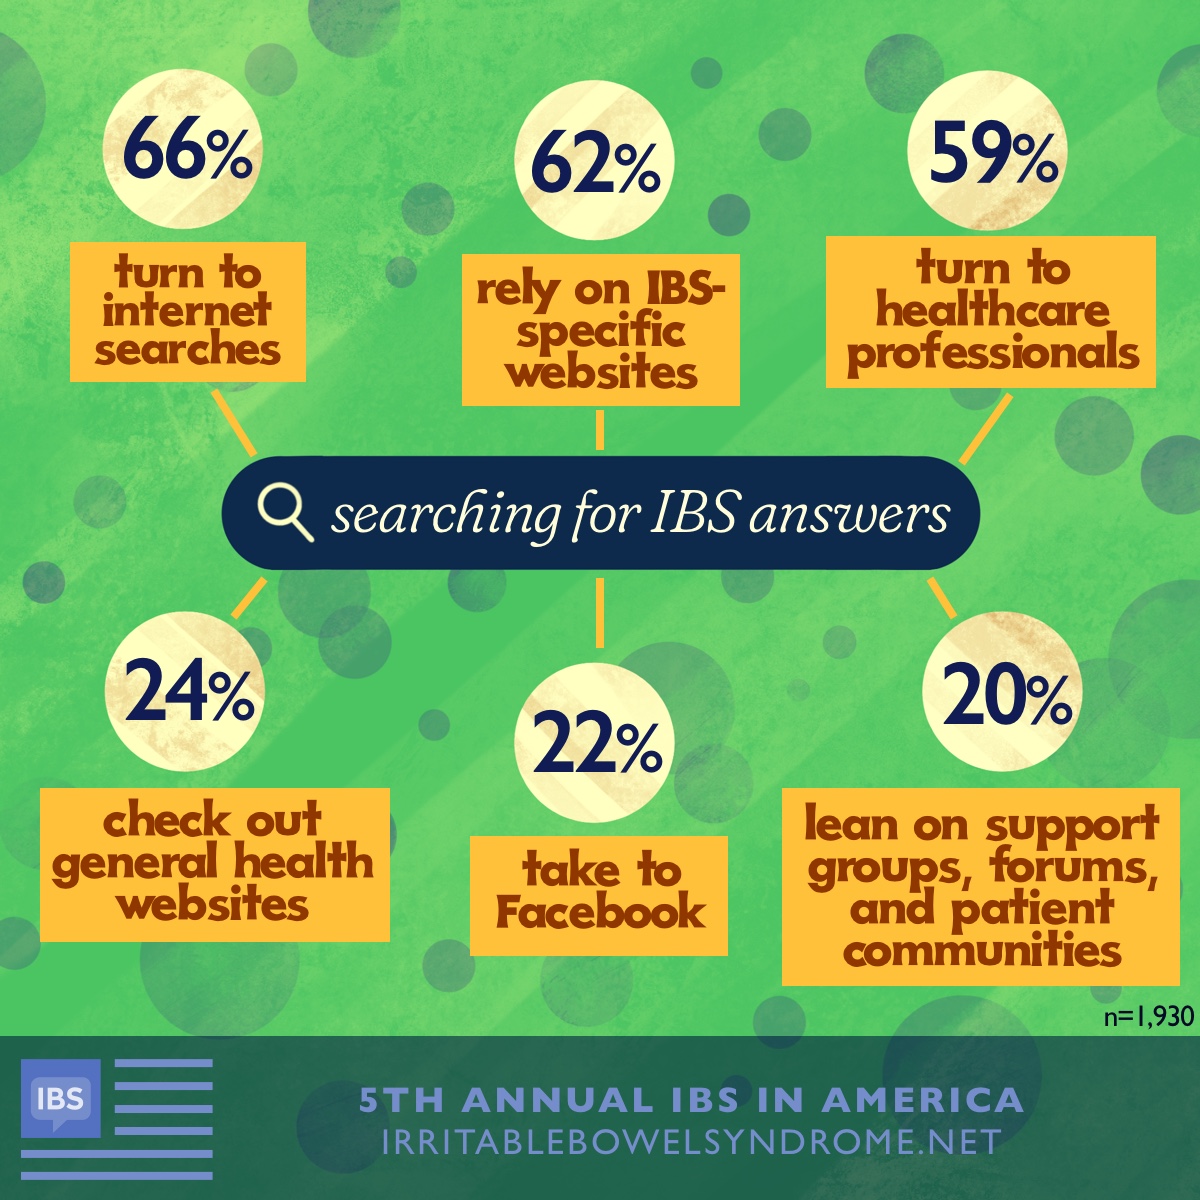 Infographic showing the amount of people who search for IBS answers through internet searches, general health websites, Facebook, IBS-specific websites, healthcare professionals, and support groups, forums, and patient communities.